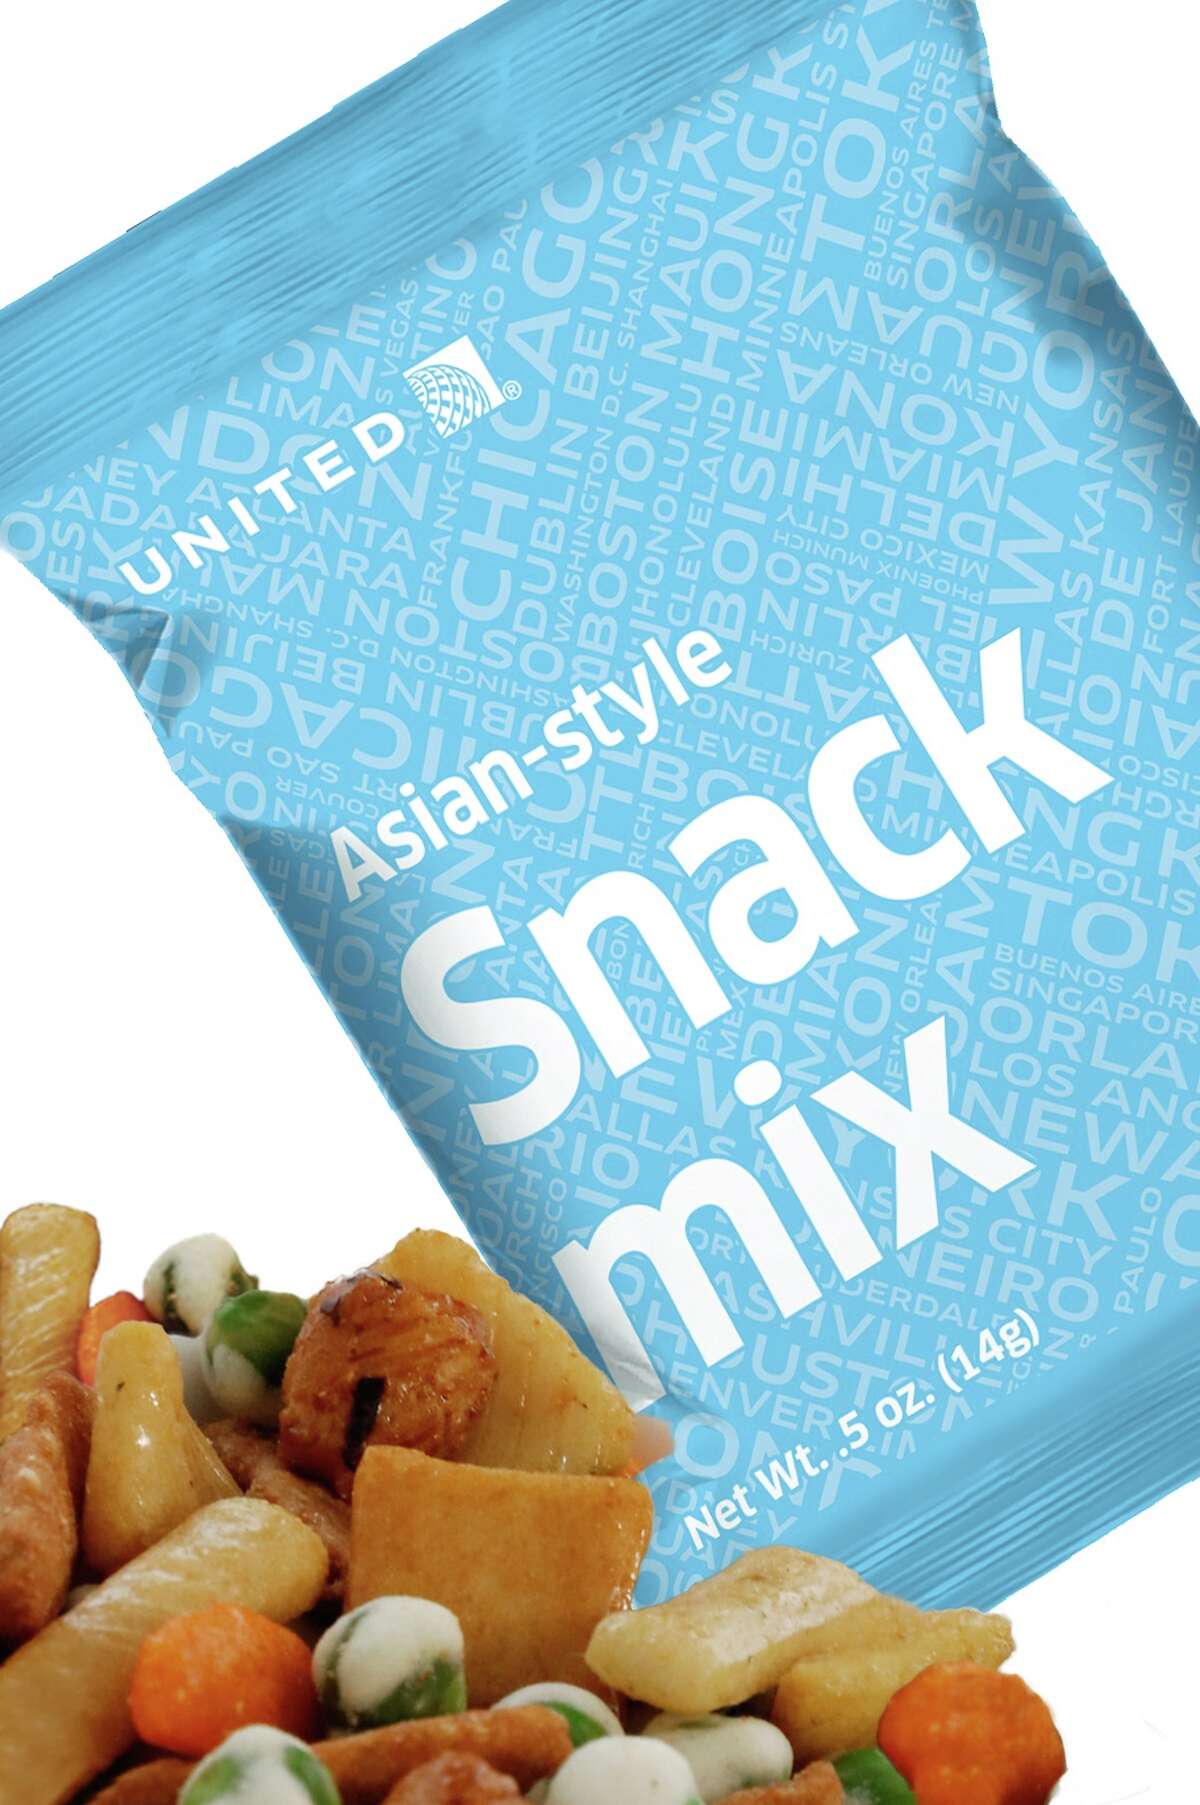 An Asian-style snack mix or zesty-ranch mix are other free snacks United Airlines' economy passengers will receive on thousands of daily flights within North America and Latin America beginning in February.